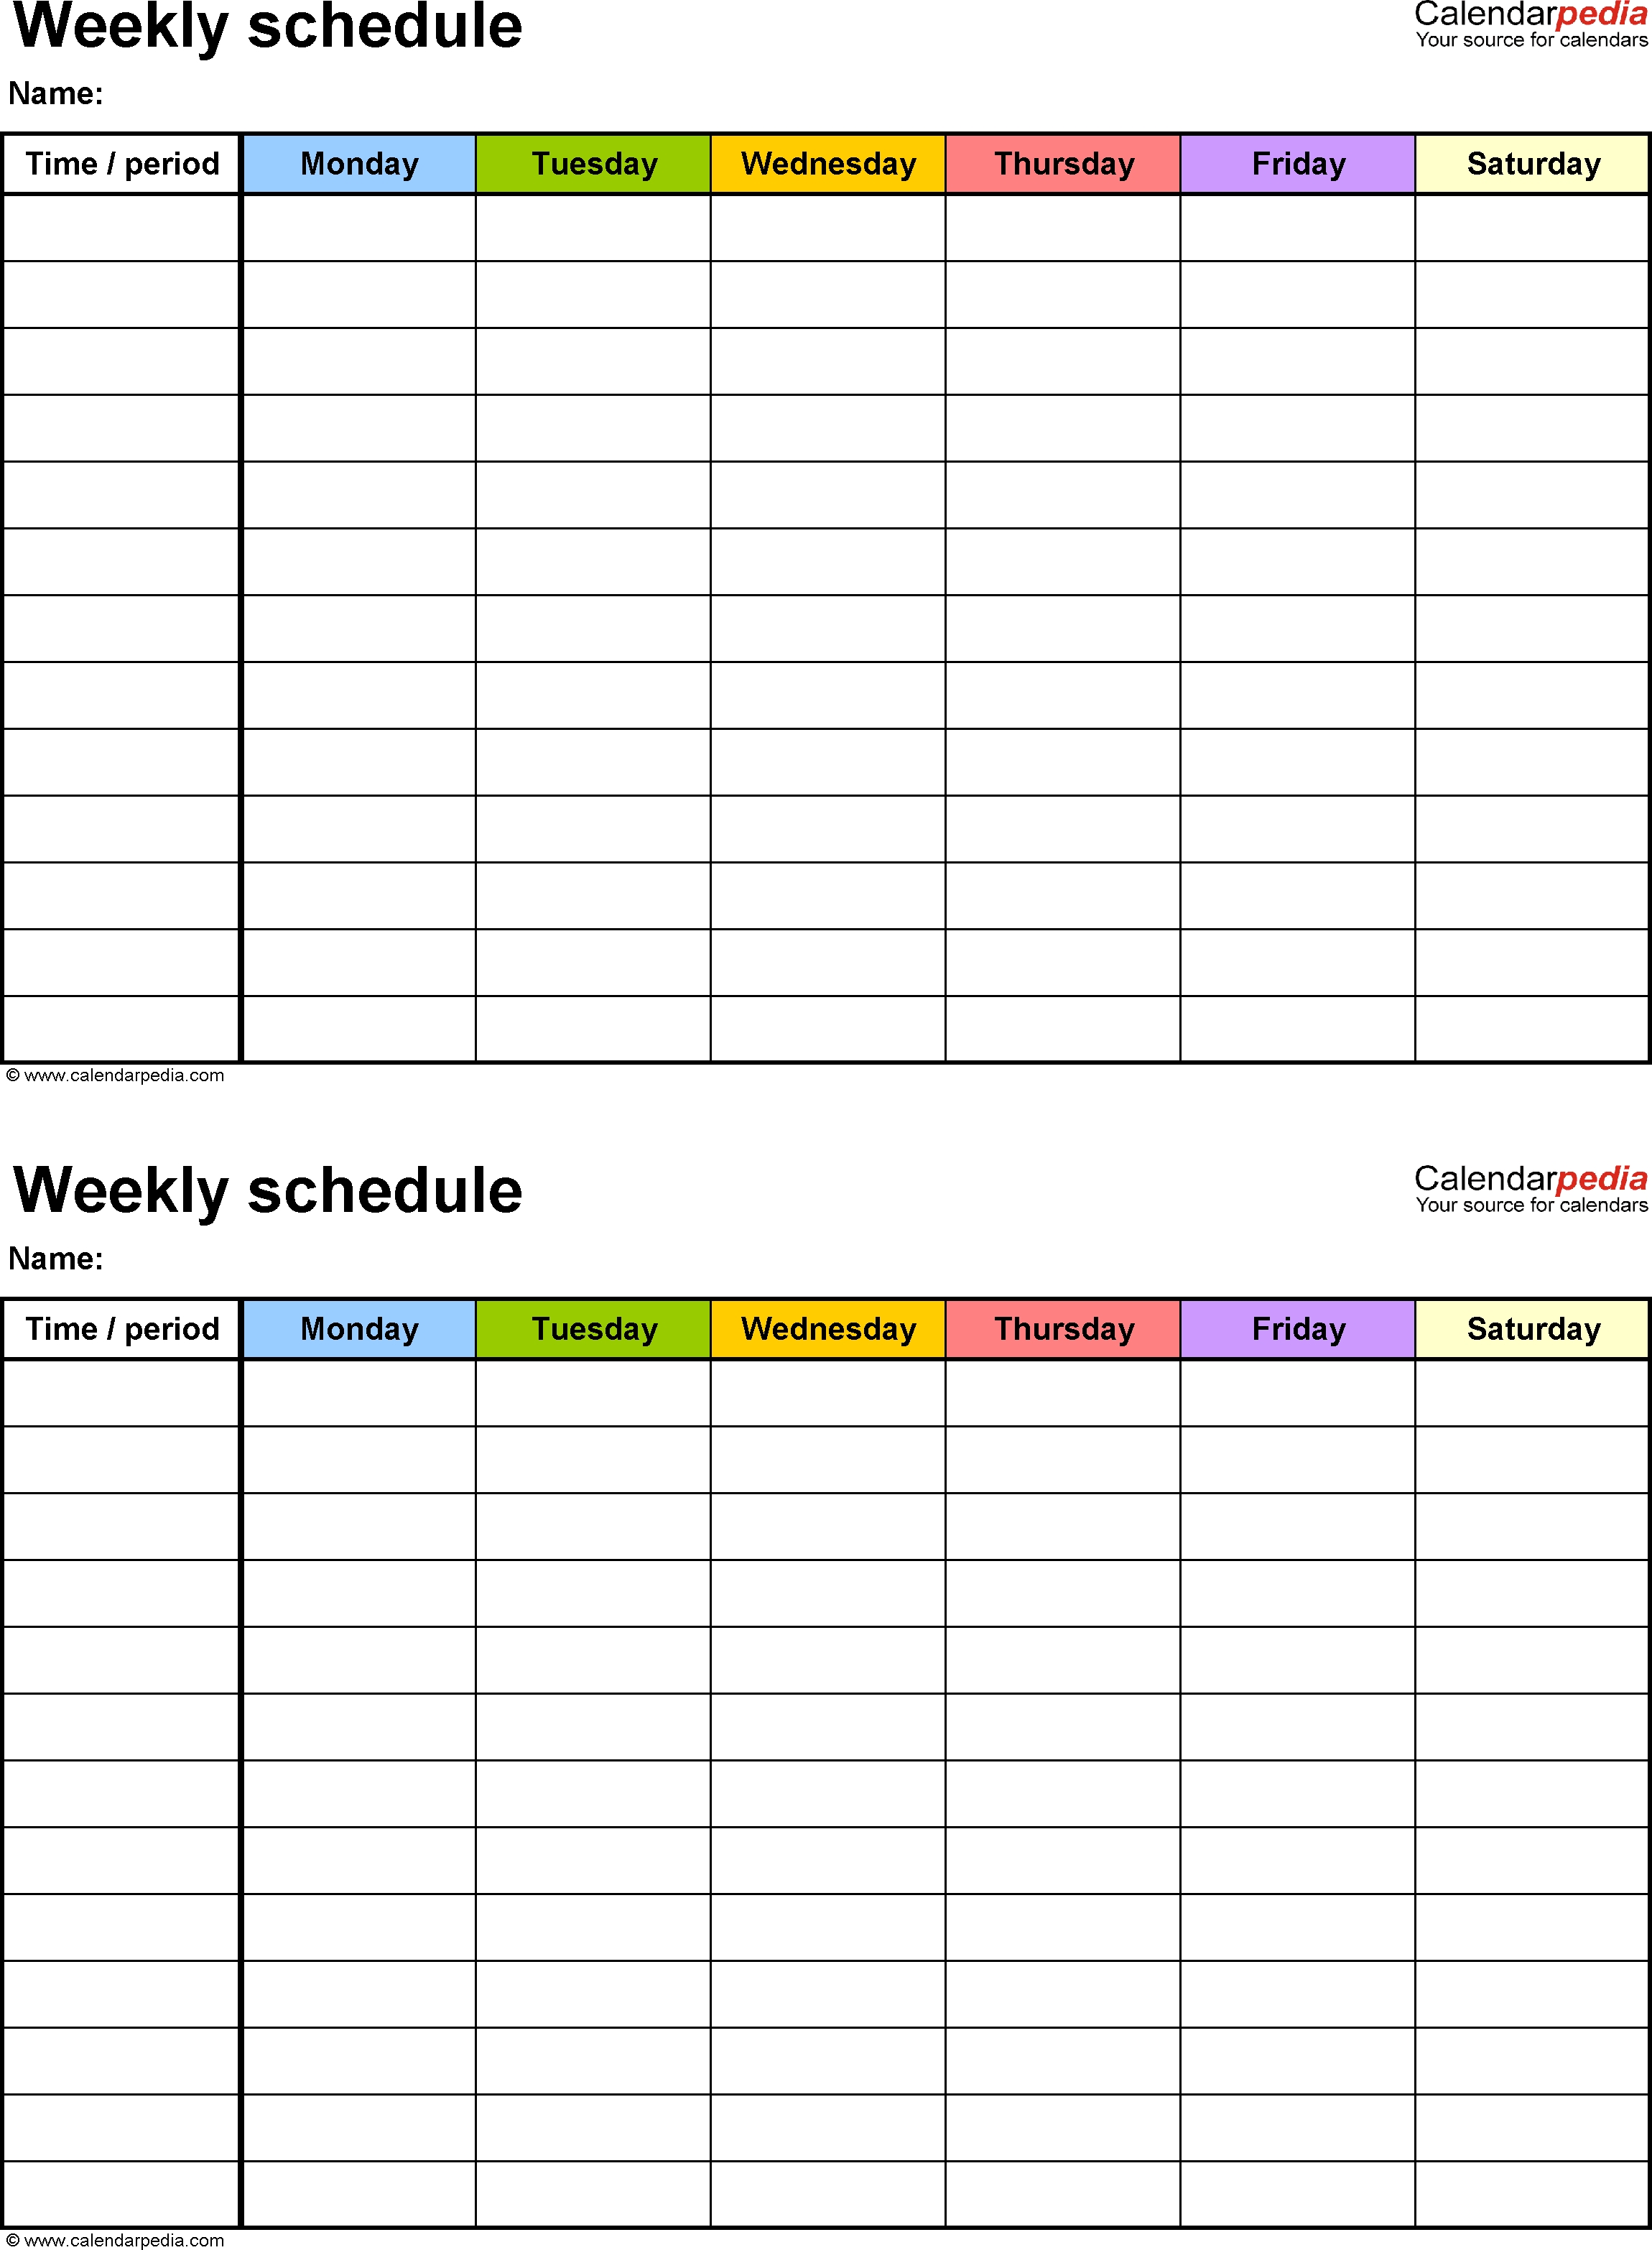 Free Weekly Schedule Templates For Word - 18 Templates intended for 7 Day 12 Week Planner Blank